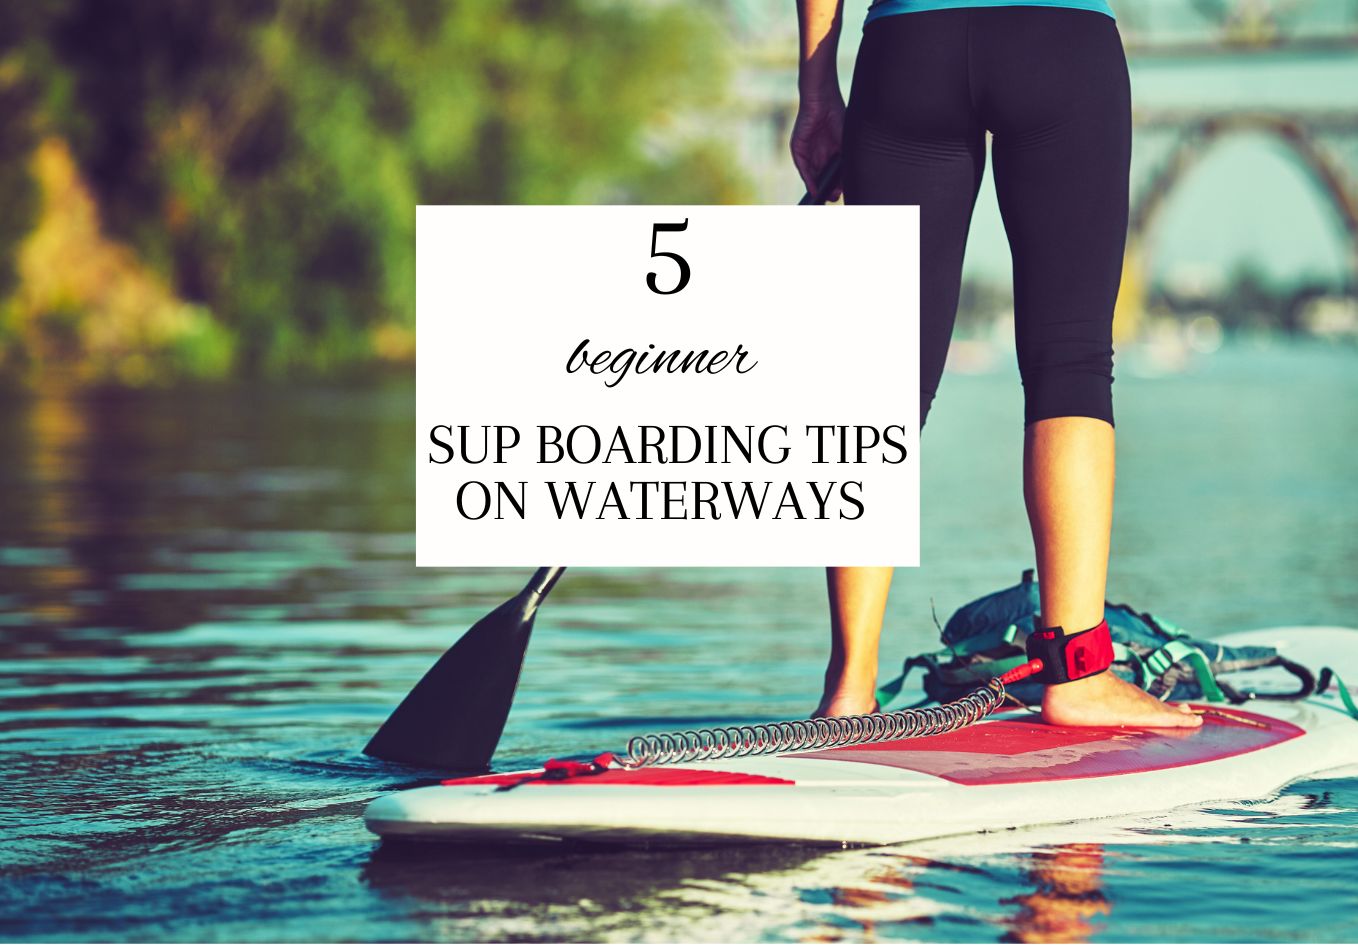 Top 5 Tips – Paddleboarding on waterways for beginners